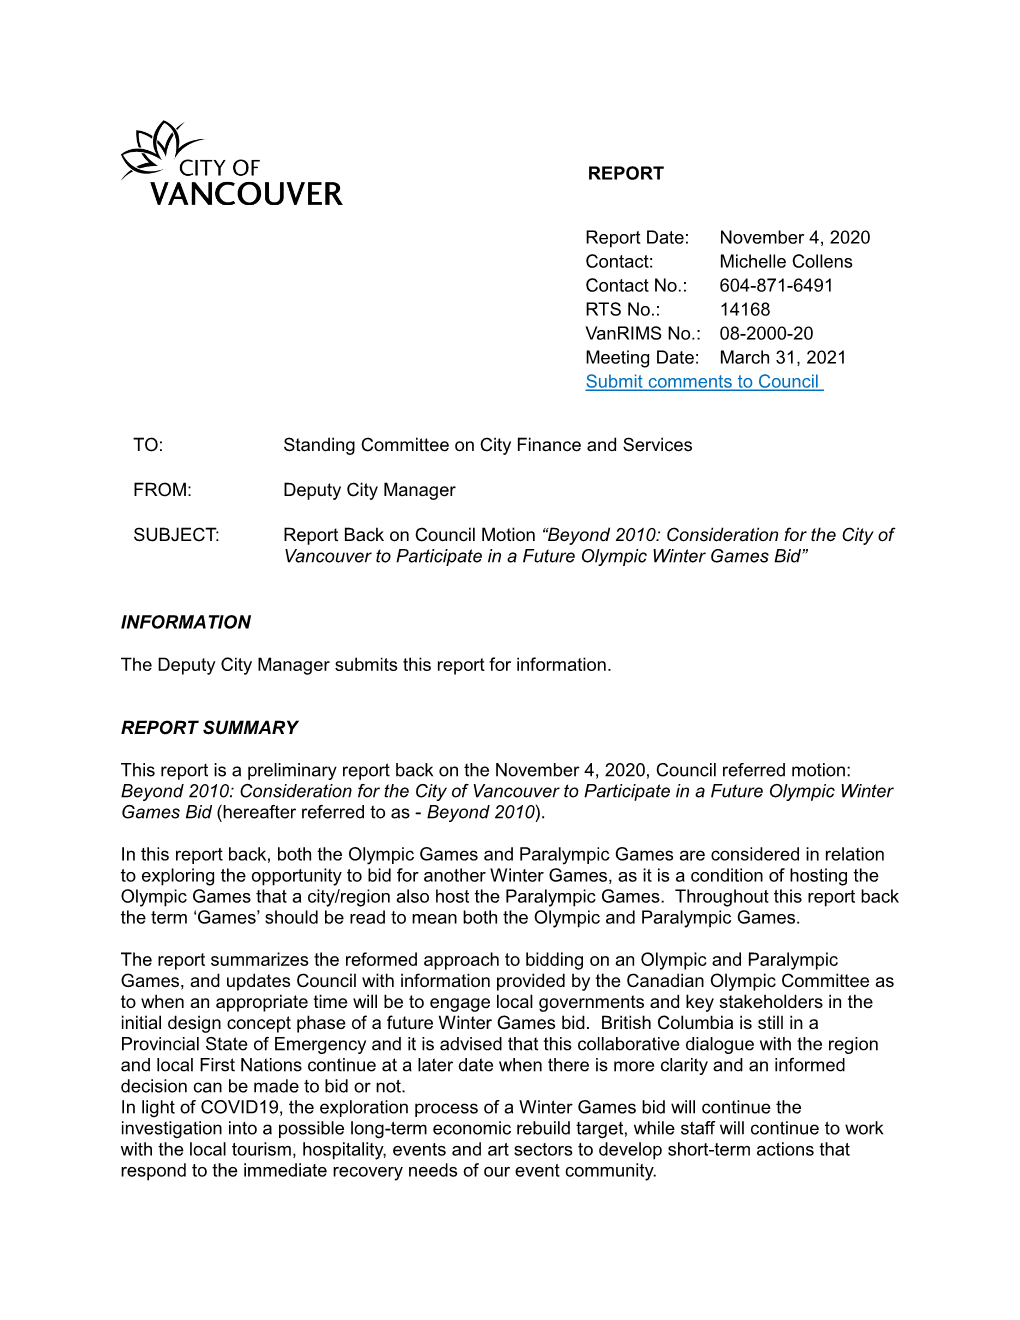 Beyond 2010: Consideration for the City of Vancouver to Participate in a Future Olympic Winter Games Bid”